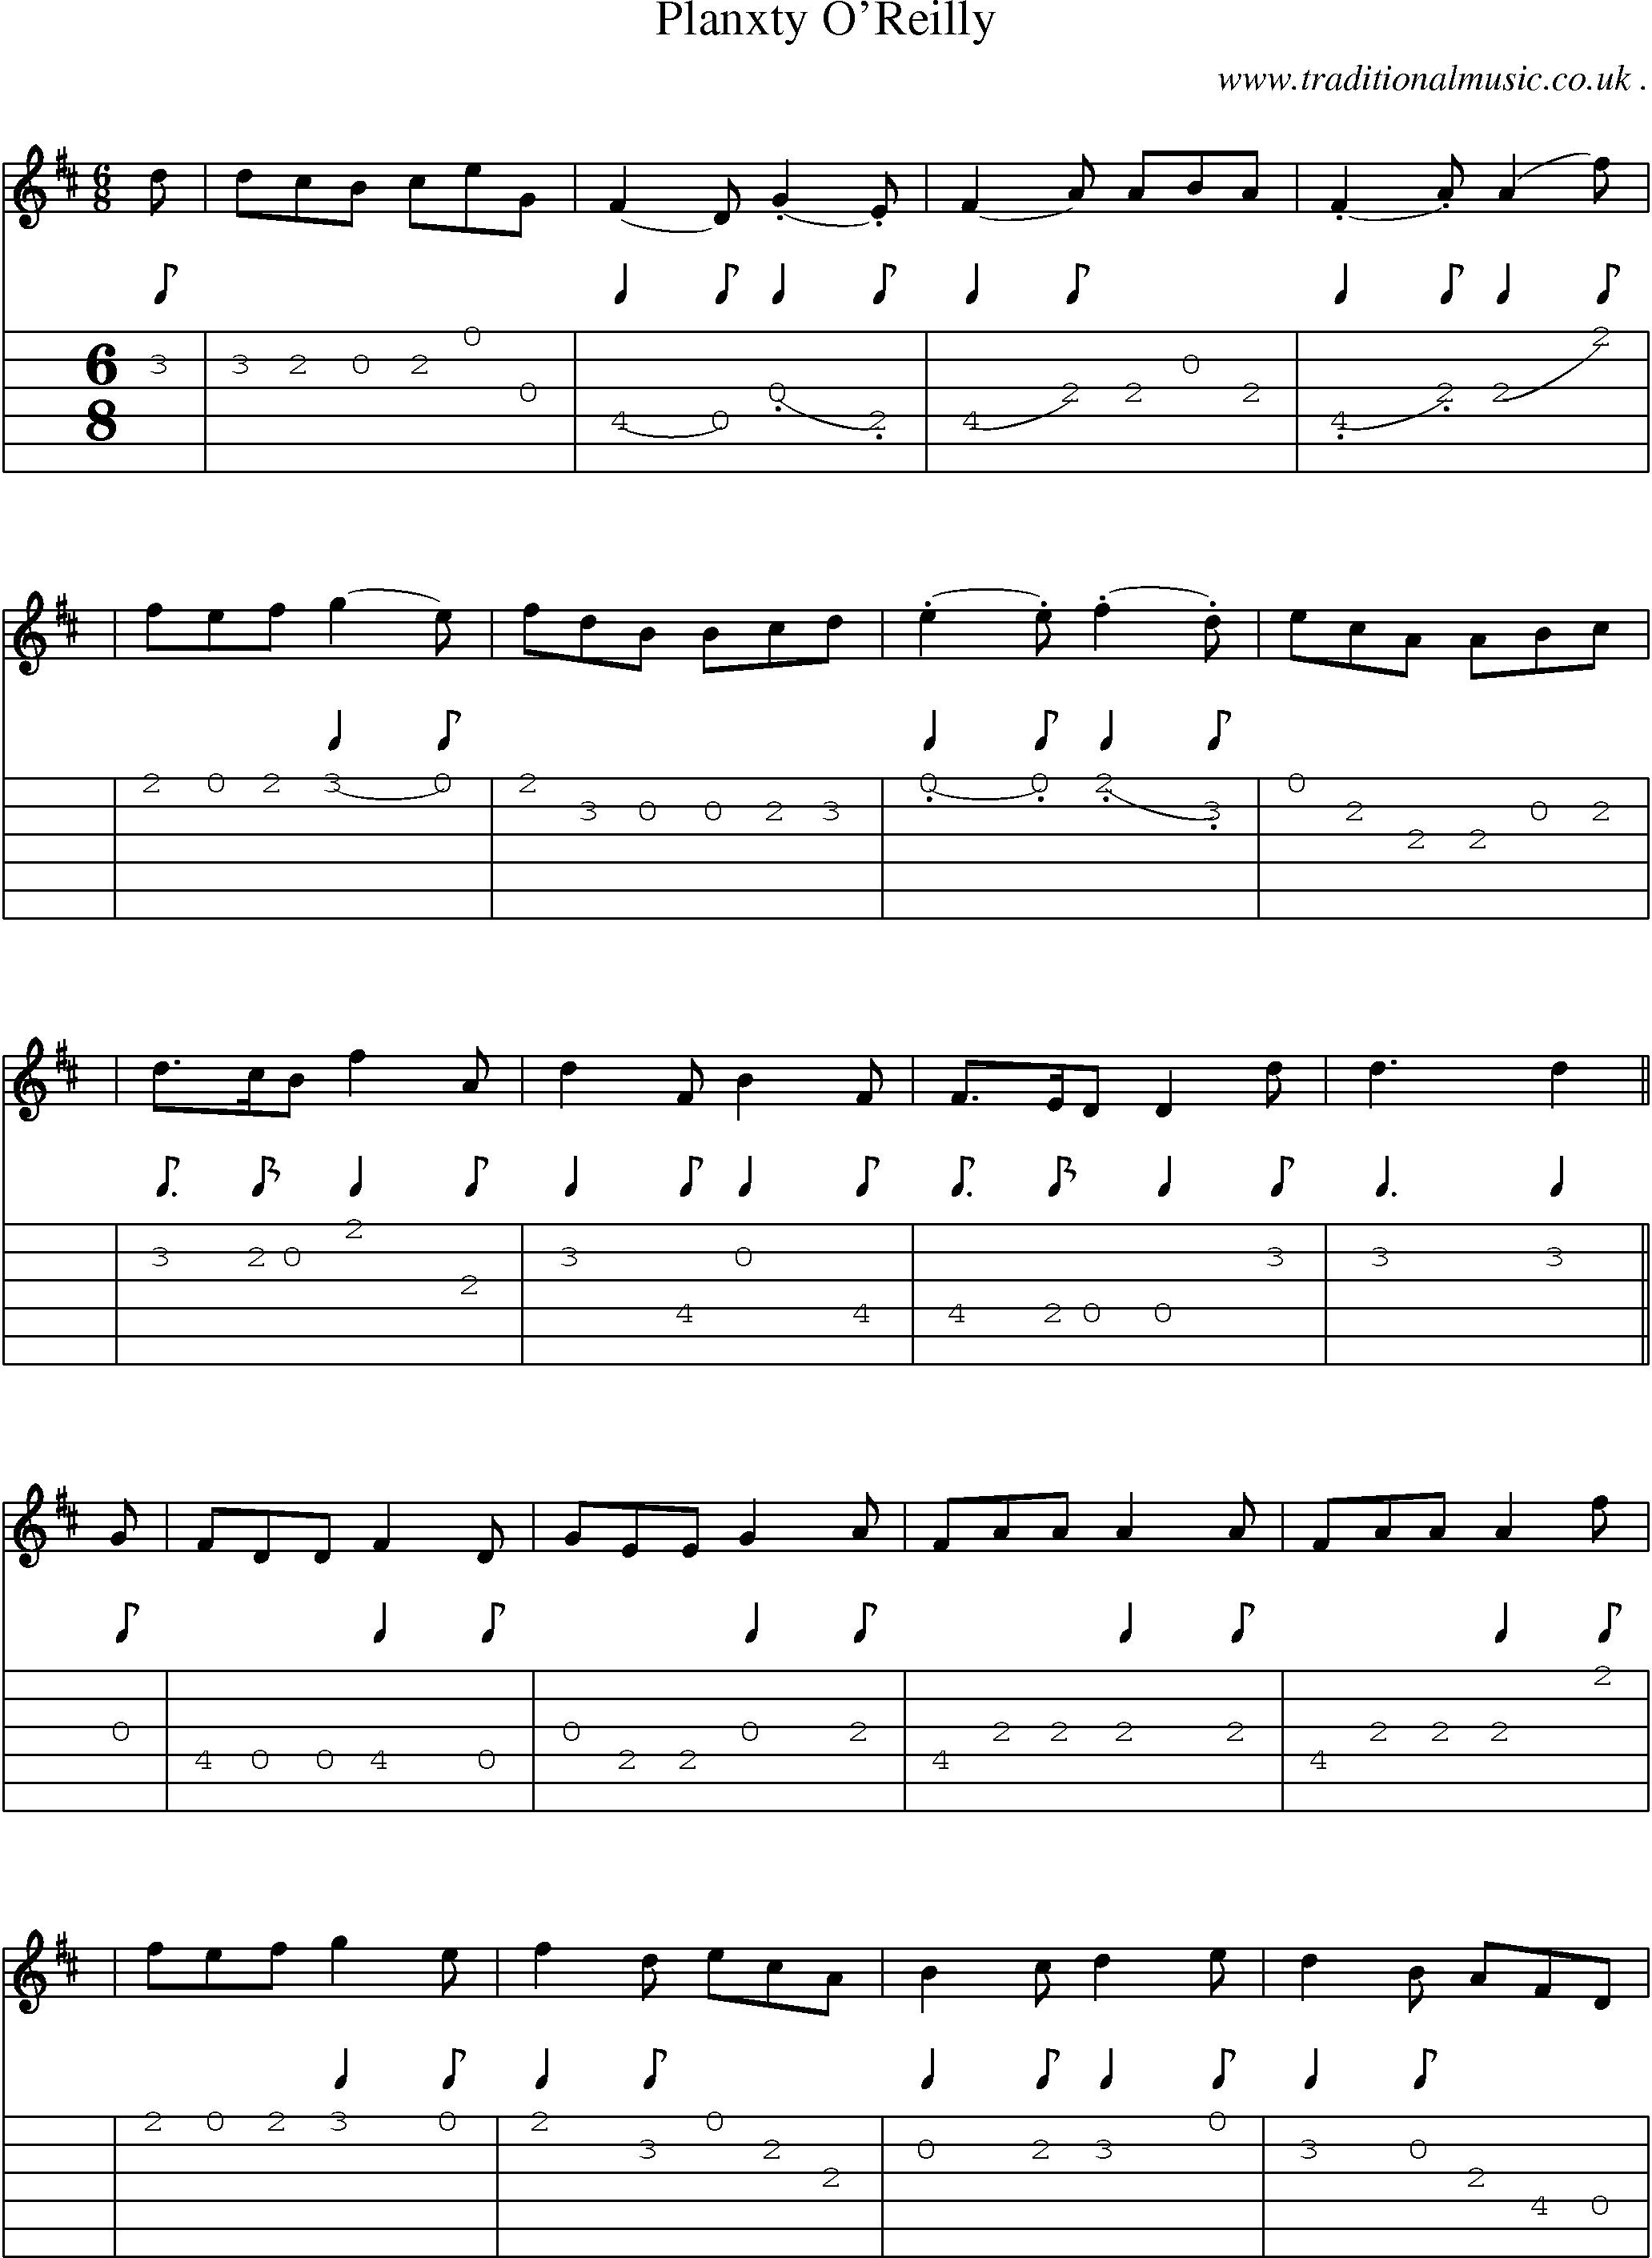 Sheet-music  score, Chords and Guitar Tabs for Planxty Oreilly